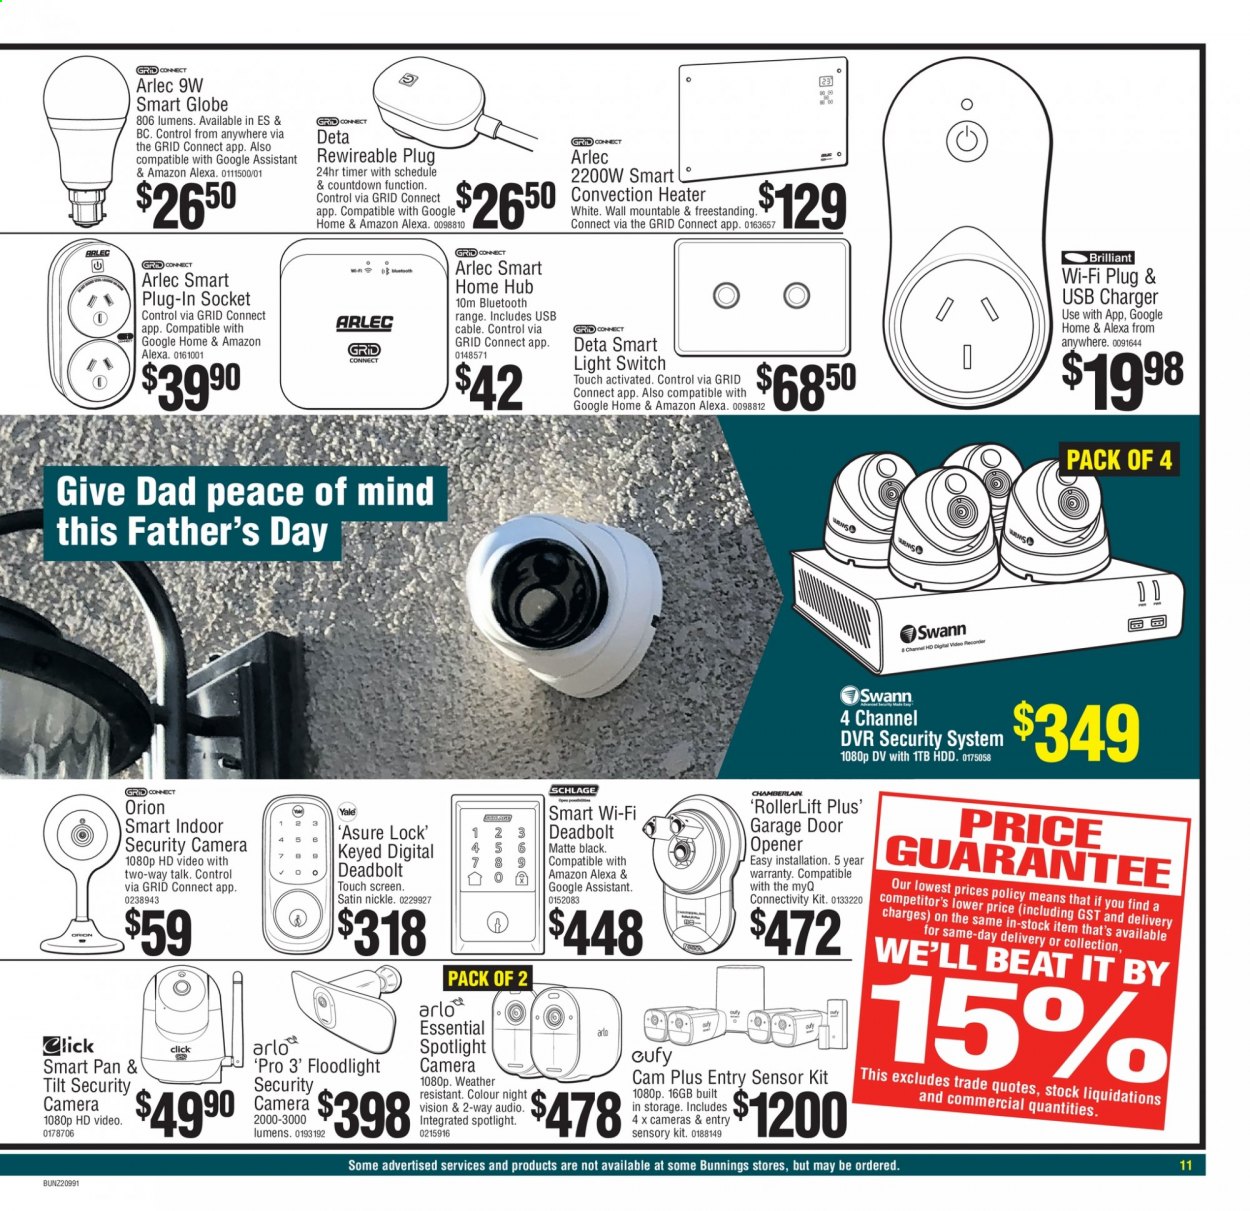 Bunnings Warehouse mailer  - 24.08.2021 - 05.09.2021. Page 11.